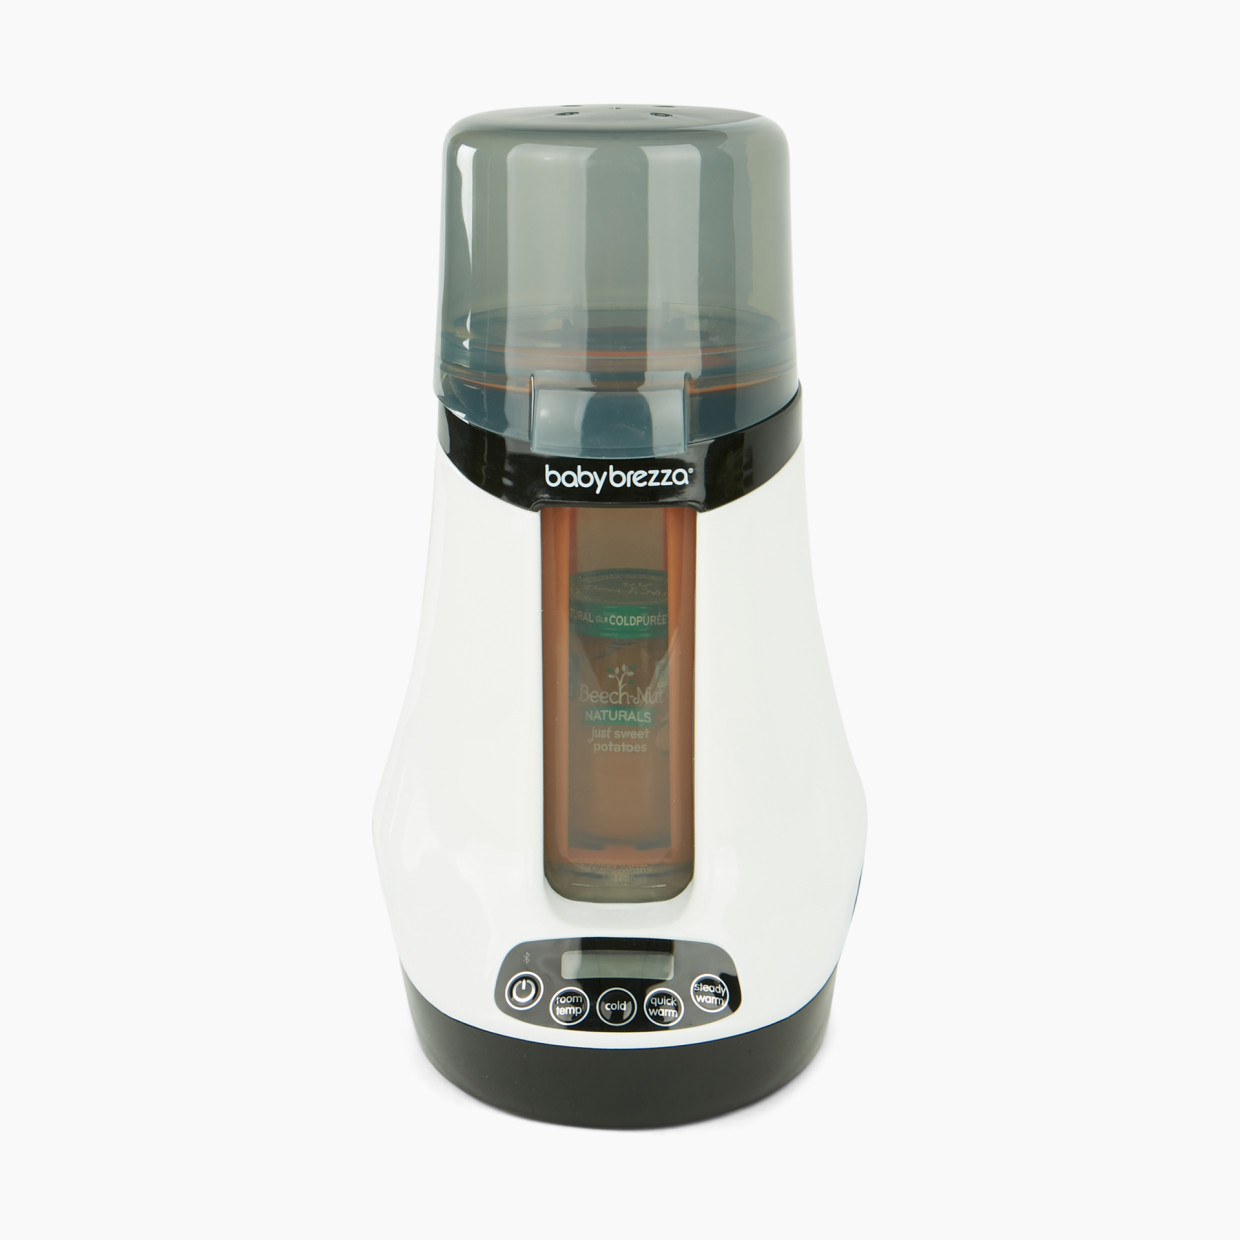 Baby Brezza Safe & Smart Bluetooth Connected Bottle Warmer - White On Black.